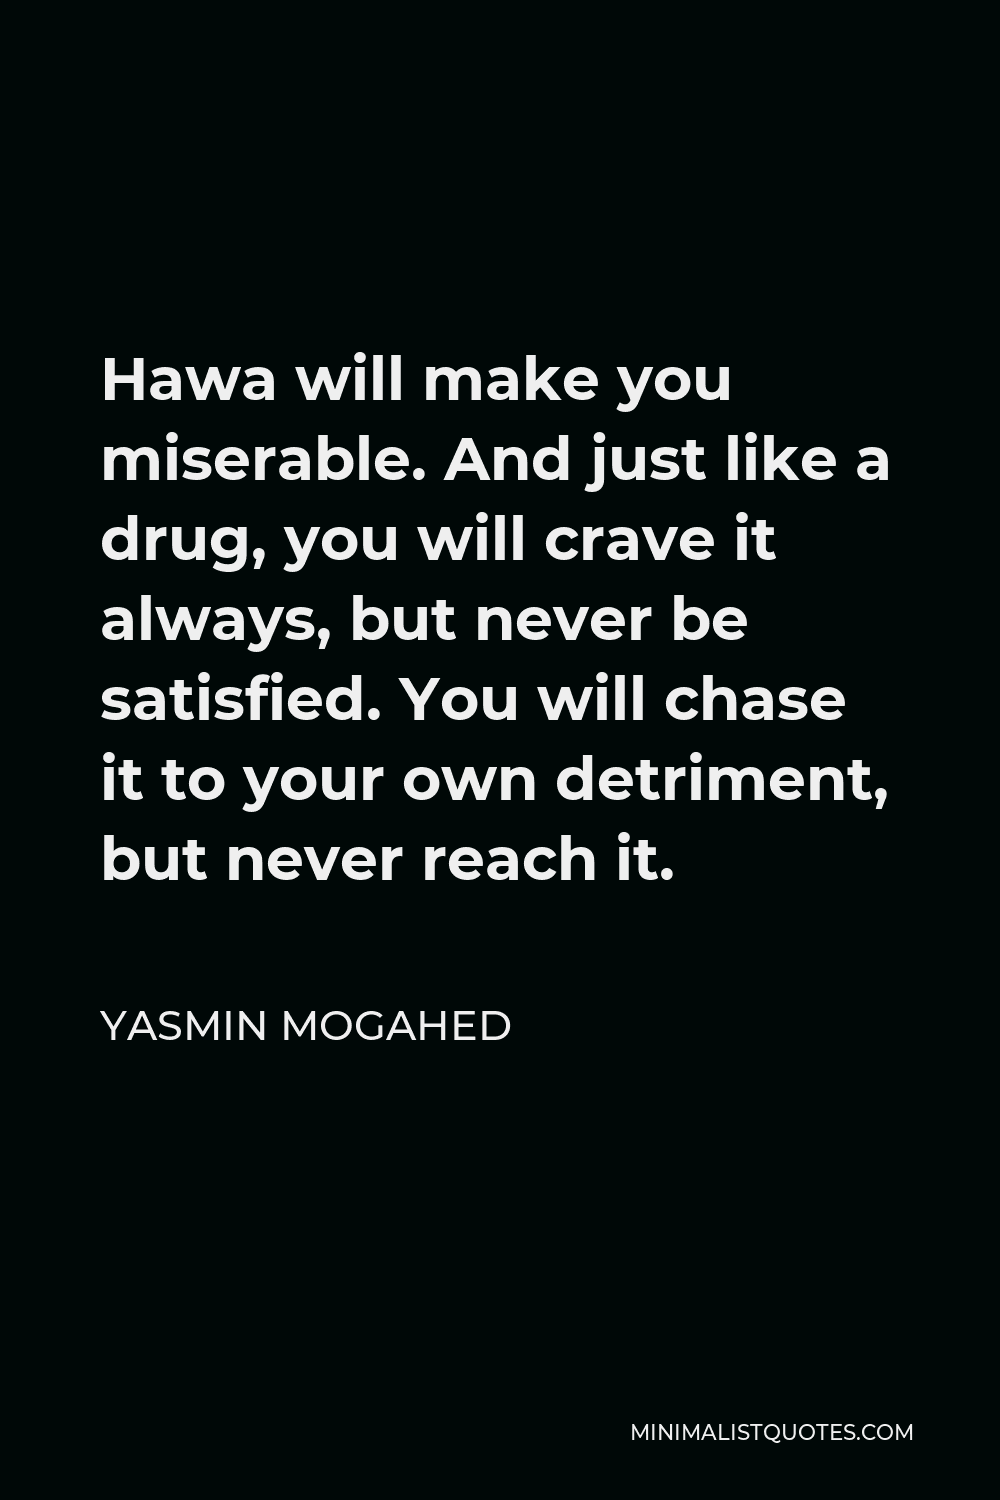 Yasmin Mogahed Quote - Hawa will make you miserable. And just like a drug, you will crave it always, but never be satisfied. You will chase it to your own detriment, but never reach it.